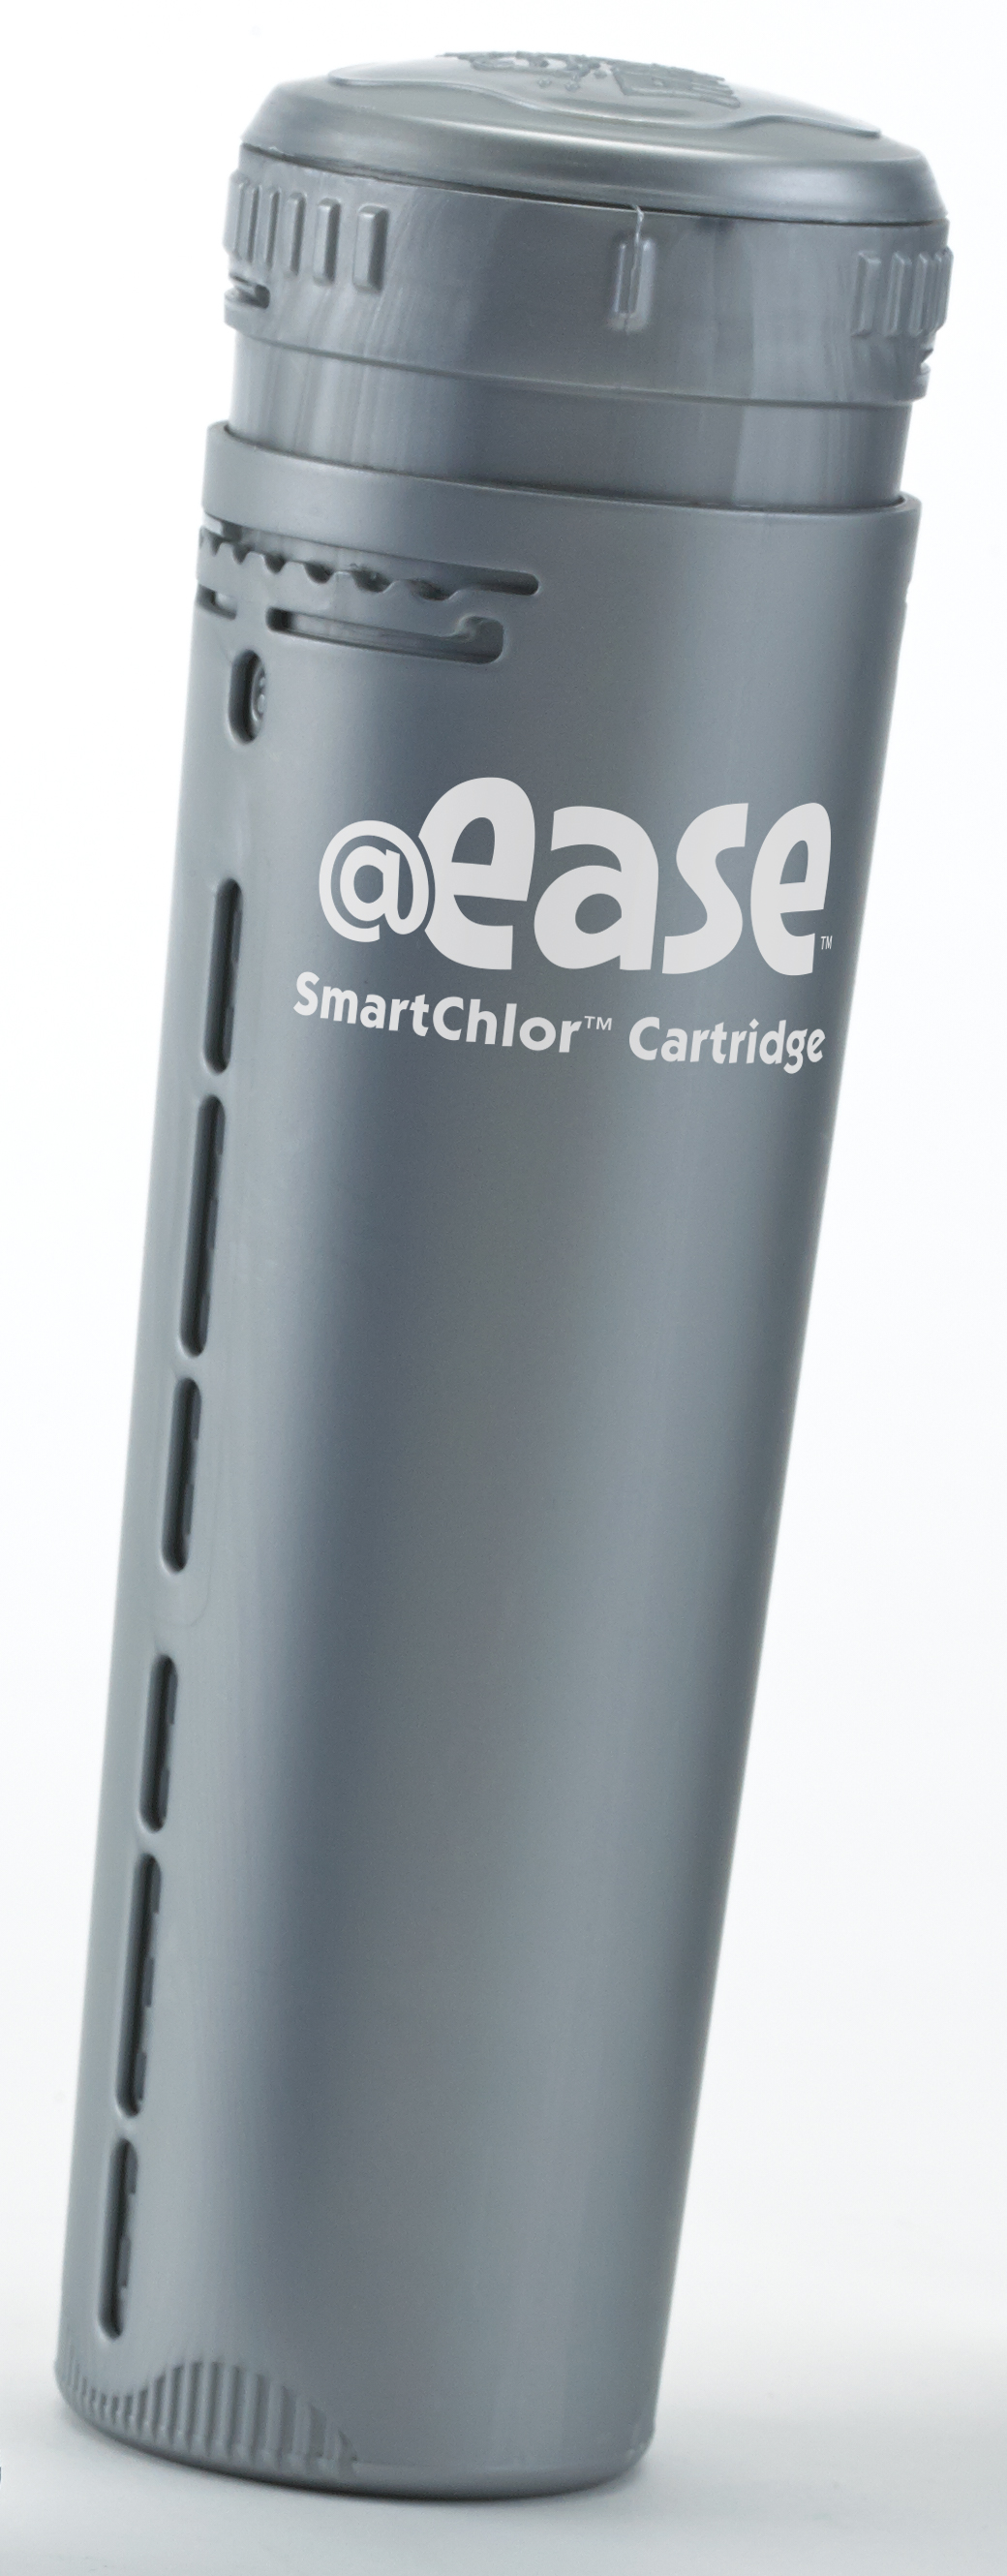 Frog @ease Smart Clhor In Line Replacement Cartridge - Click Image to Close